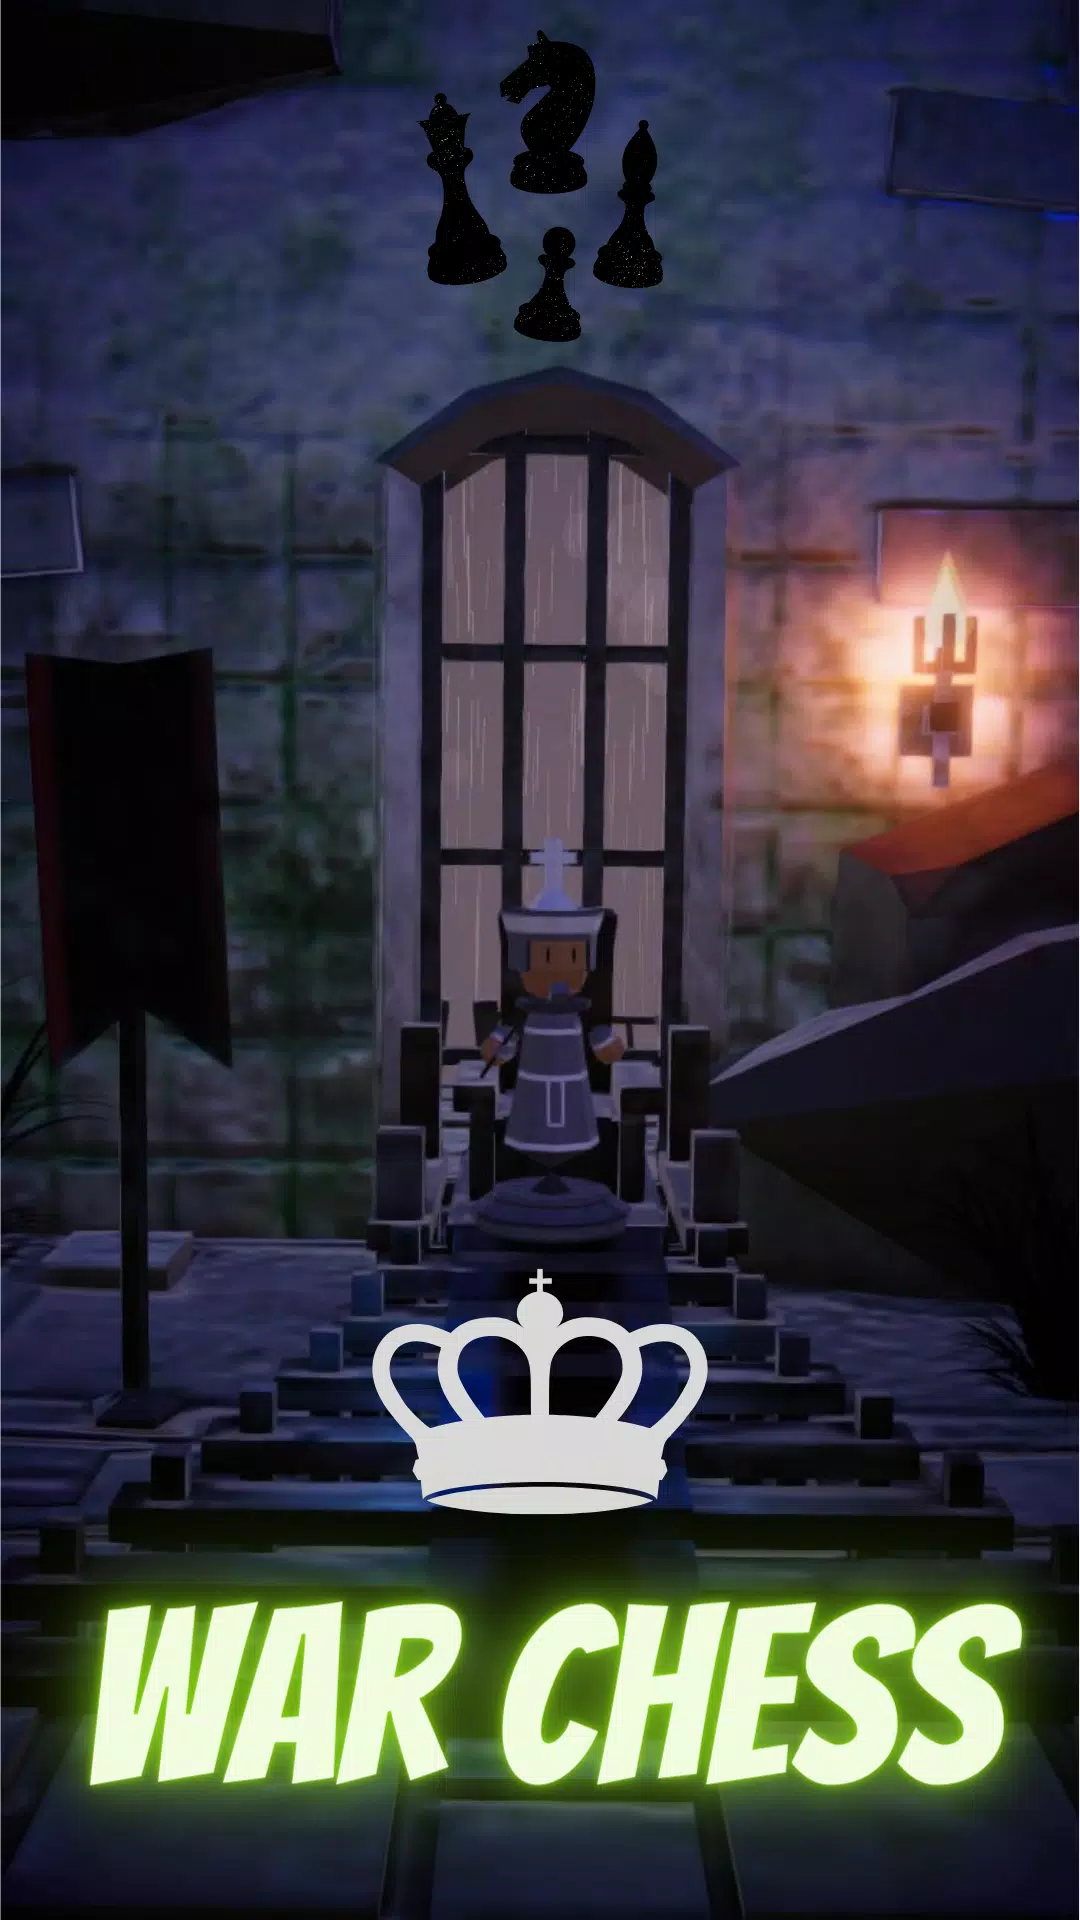 Chess Castle Apk Download for Android- Latest version 0.4.7- com